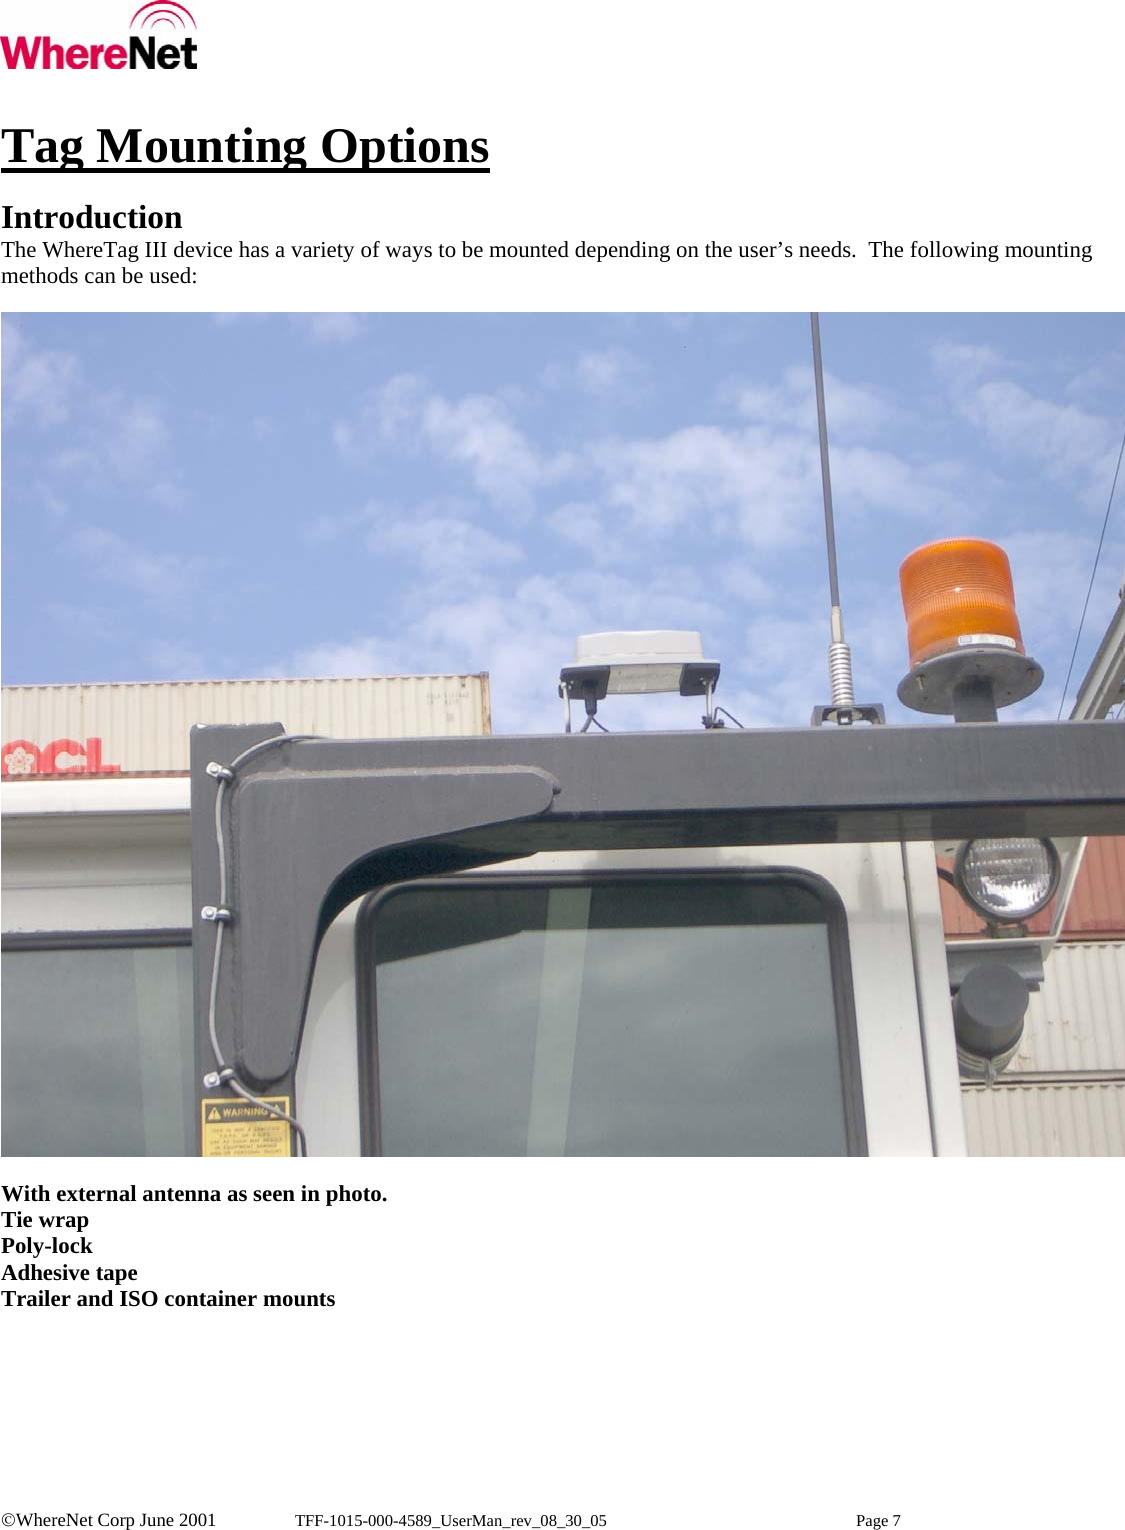    ©WhereNet Corp June 2001  TFF-1015-000-4589_UserMan_rev_08_30_05 Page 7  Tag Mounting Options  Introduction The WhereTag III device has a variety of ways to be mounted depending on the user’s needs.  The following mounting methods can be used:     With external antenna as seen in photo. Tie wrap Poly-lock Adhesive tape Trailer and ISO container mounts     